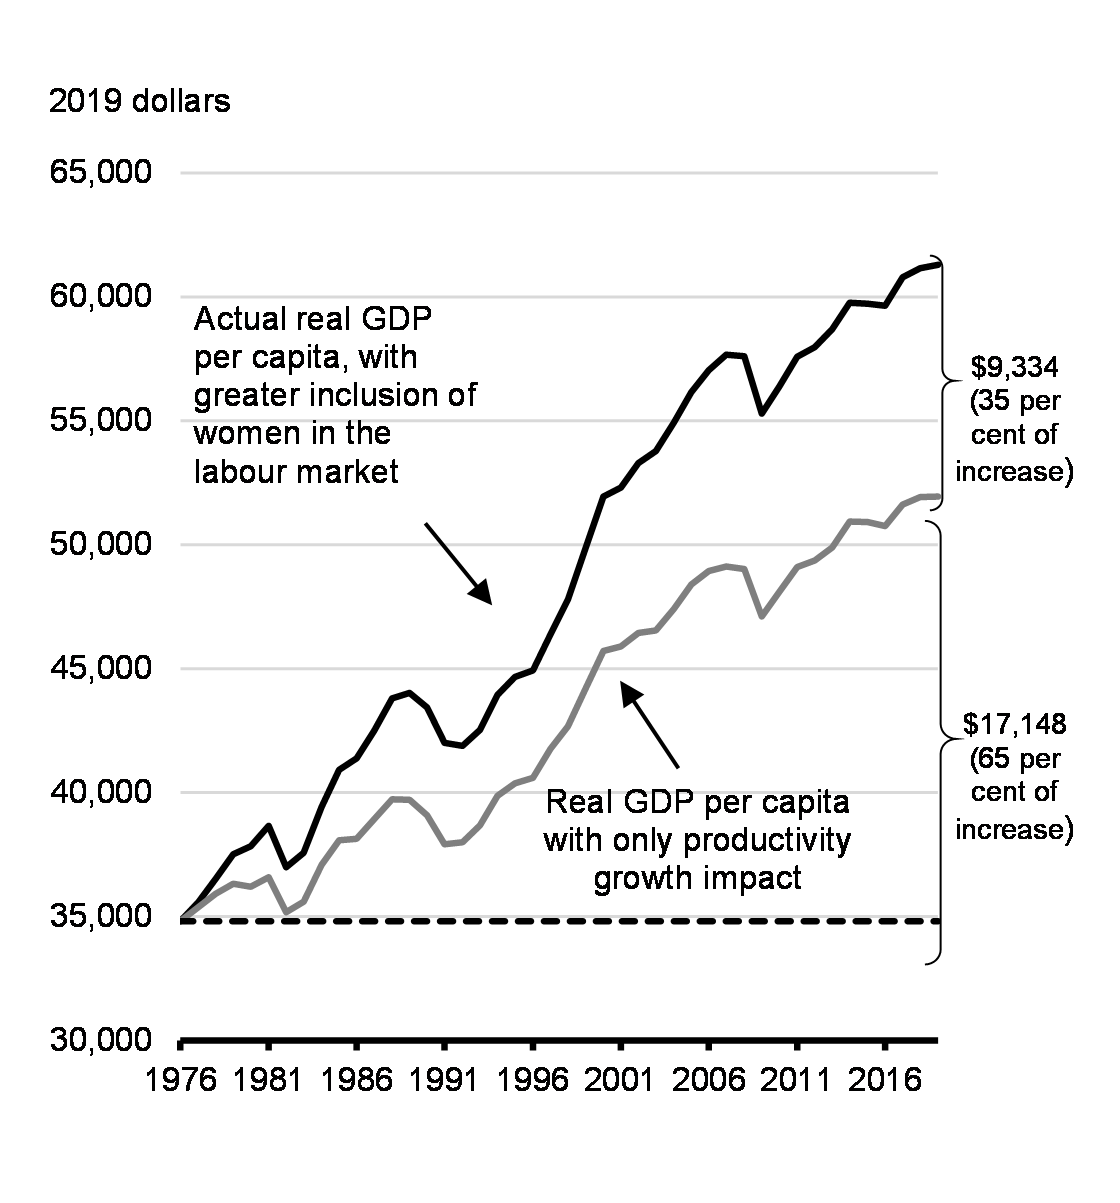 Chart 3.1: The Impact of Women's Participation in the Workforce on Real GDP per Capita, 1976 to 2019